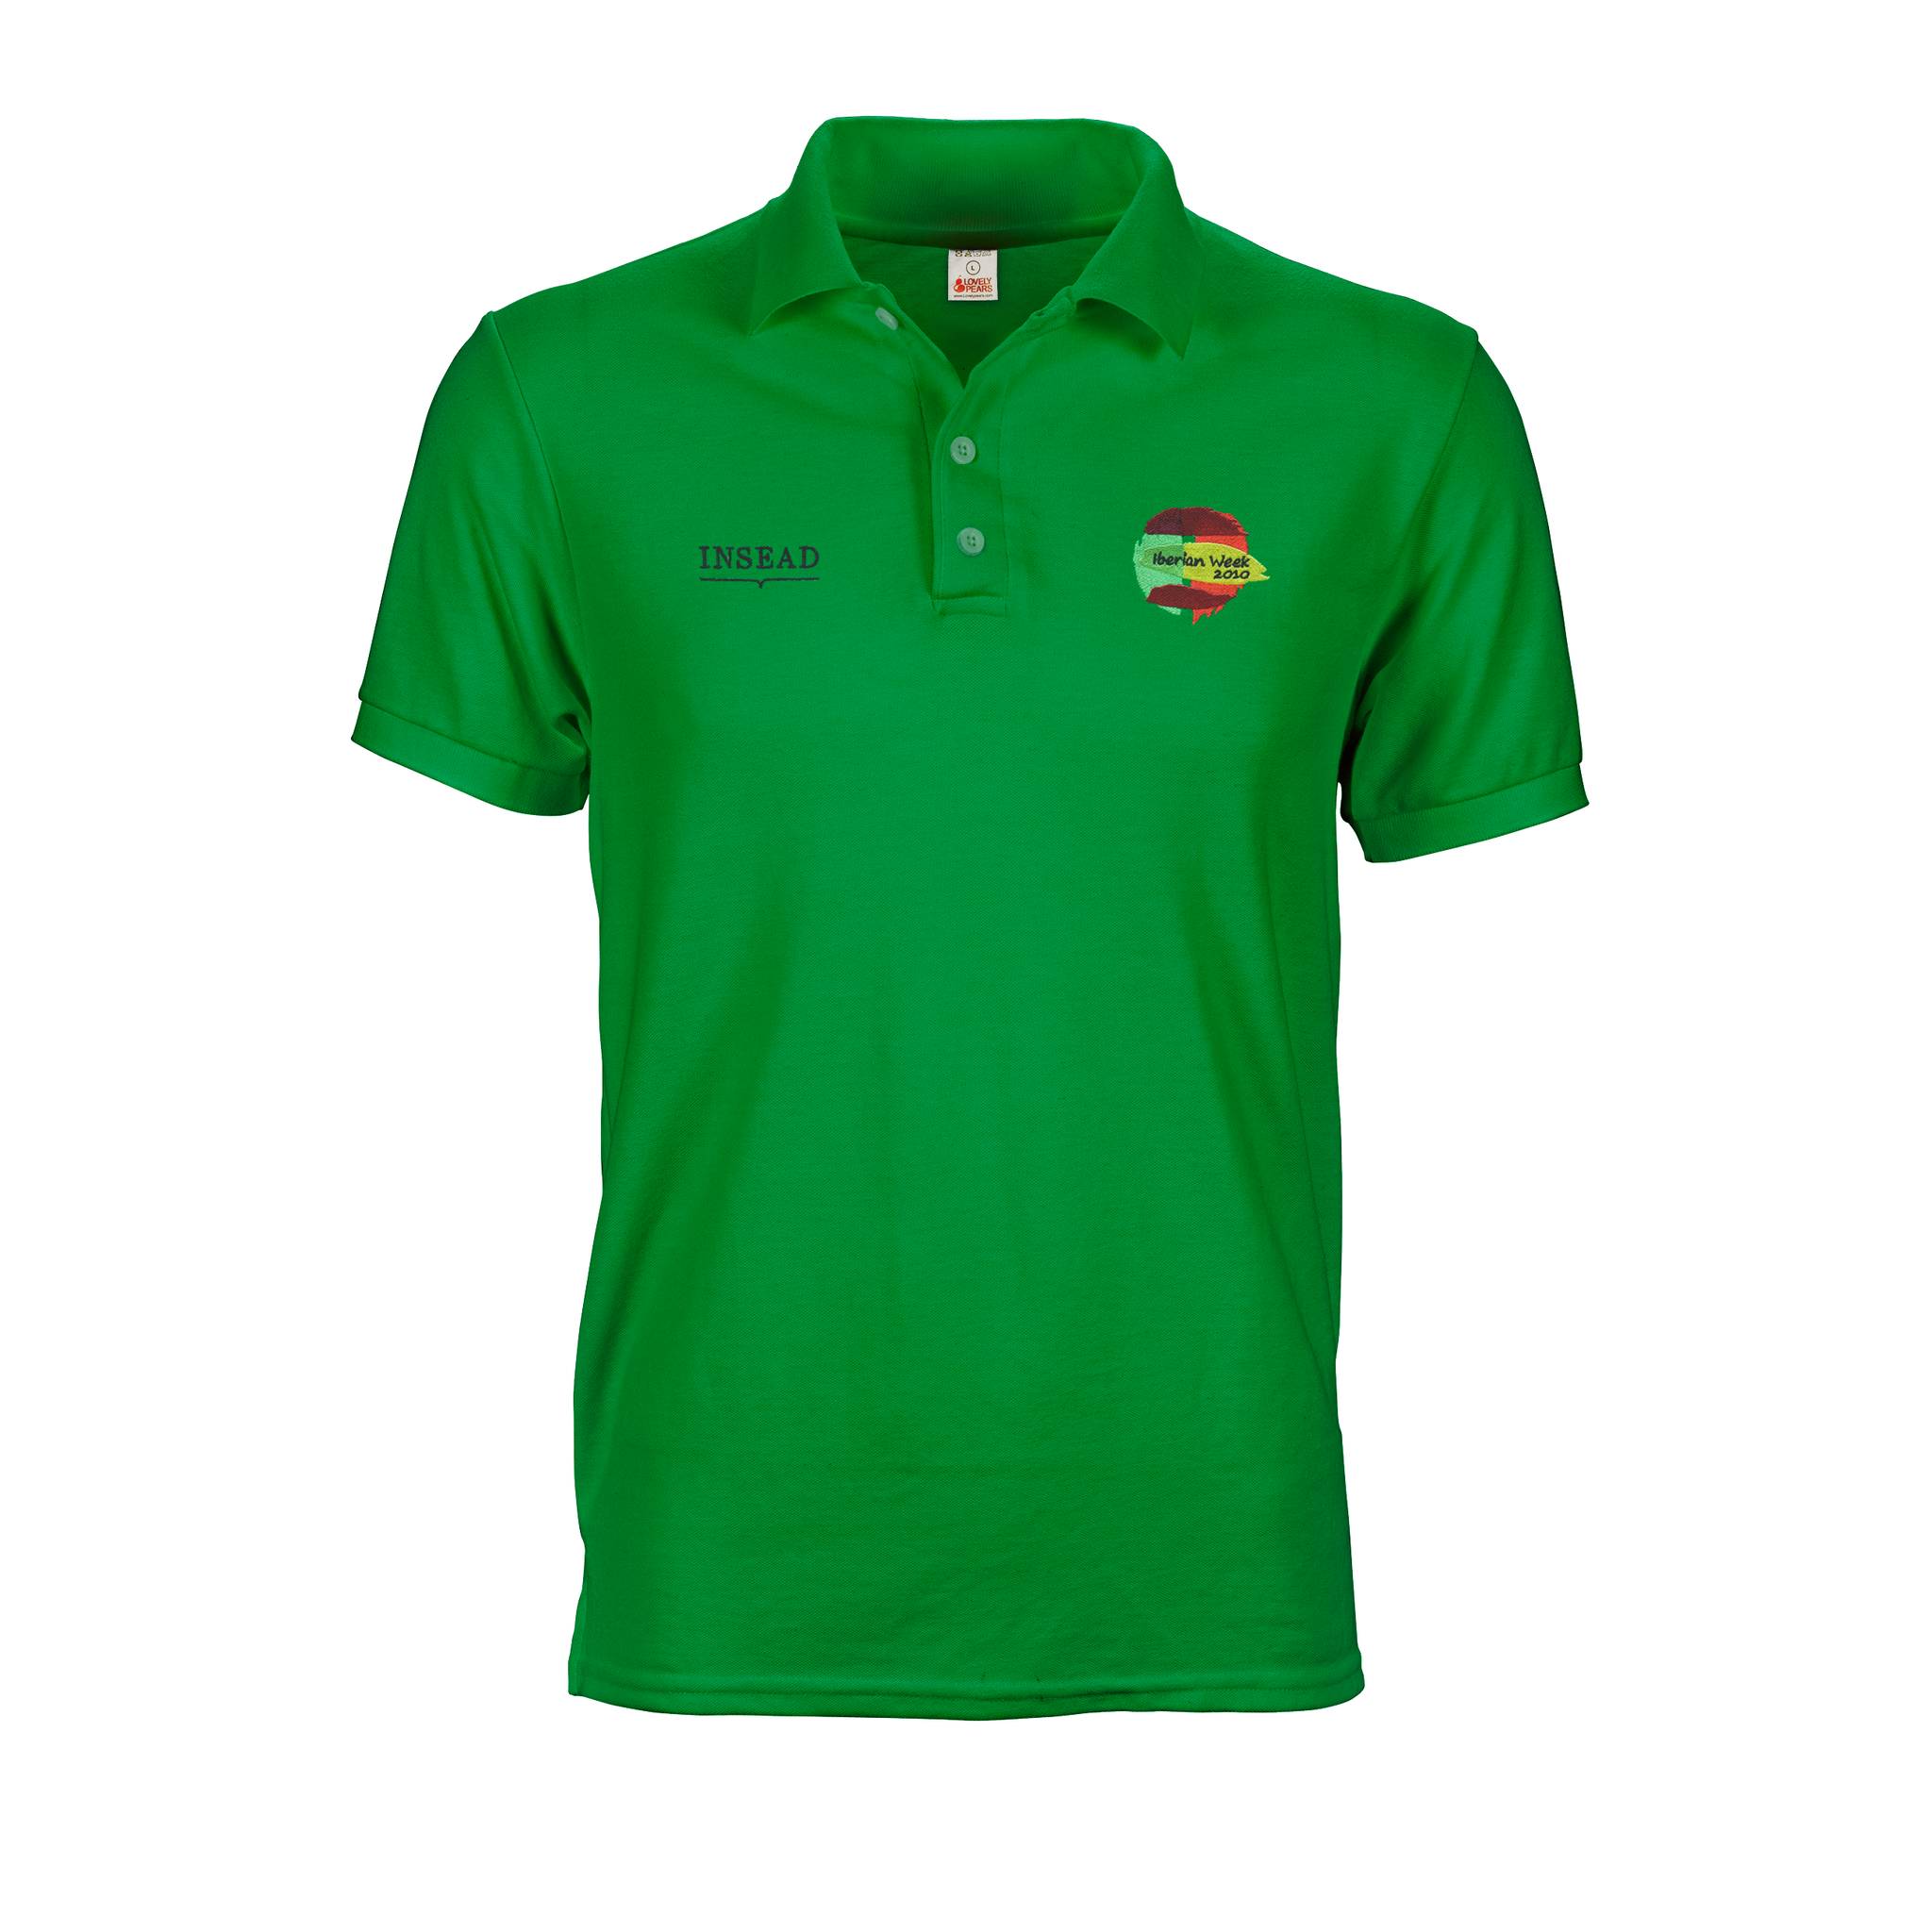 Green polo tee shirt with insead A6 logo embroidery